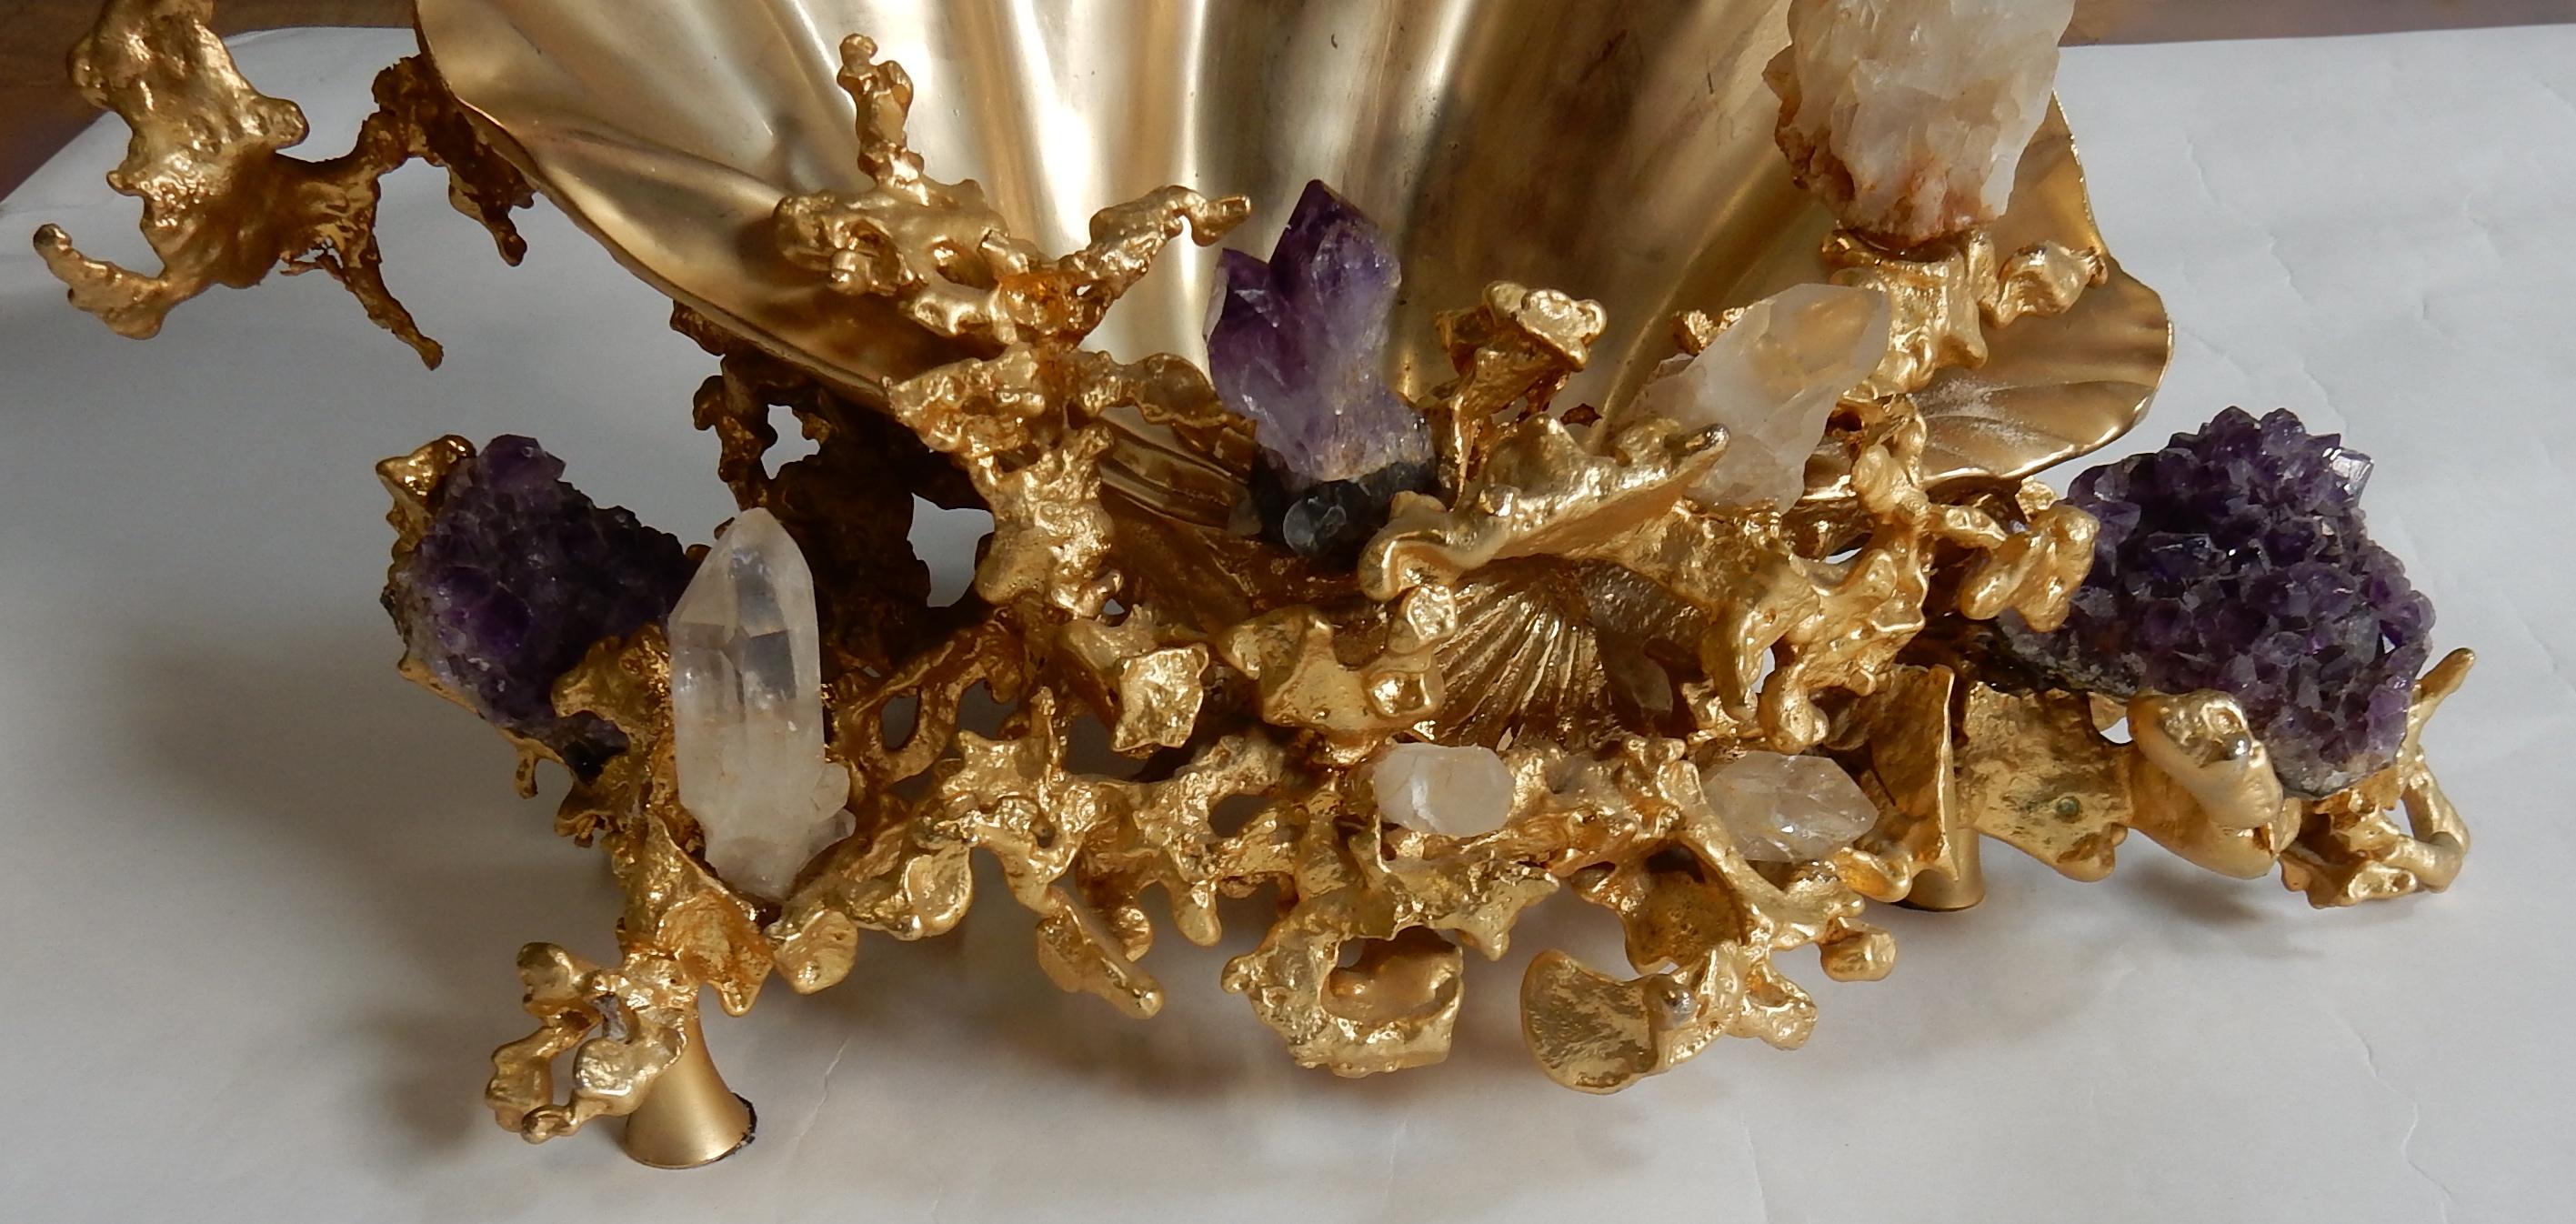 Sculpture with font, amethyst and rock crystal by Boeltz, golden bronze, good condition, circa 1970-1980.
12 Kg 300.